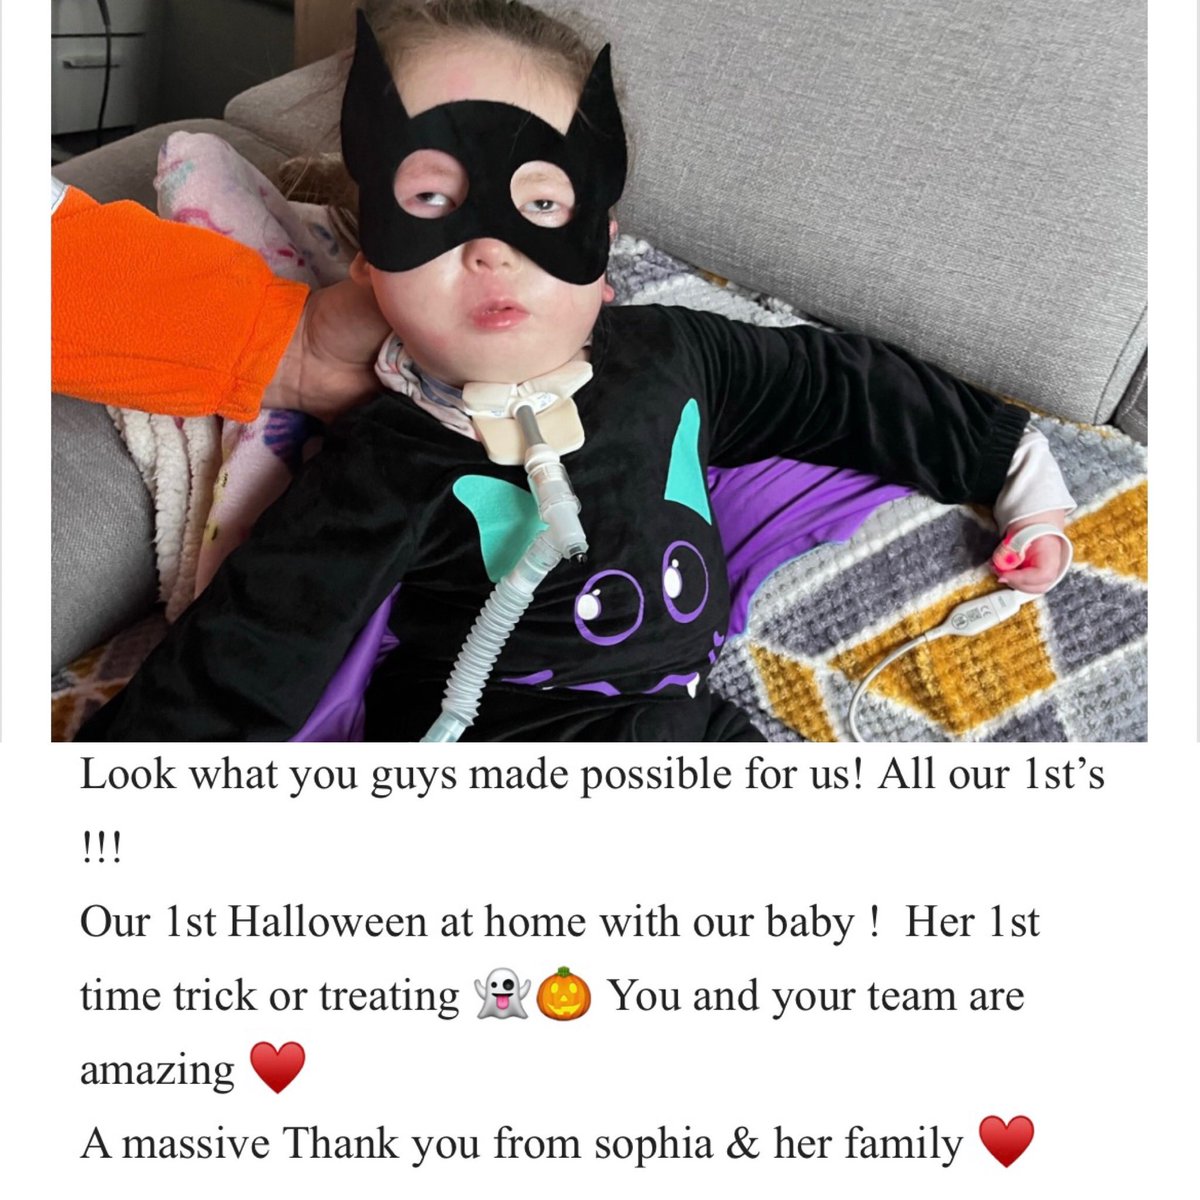 Happy Halloween from Sophia and CPOC 🎃👻 Lovely feedback from family, we are so proud to be able to support Sophia to have all her firsts out of hospital Xmas ✅ Birthday ✅ Halloween ✅ Now where’s that bonfire? @EmmaCam92054227